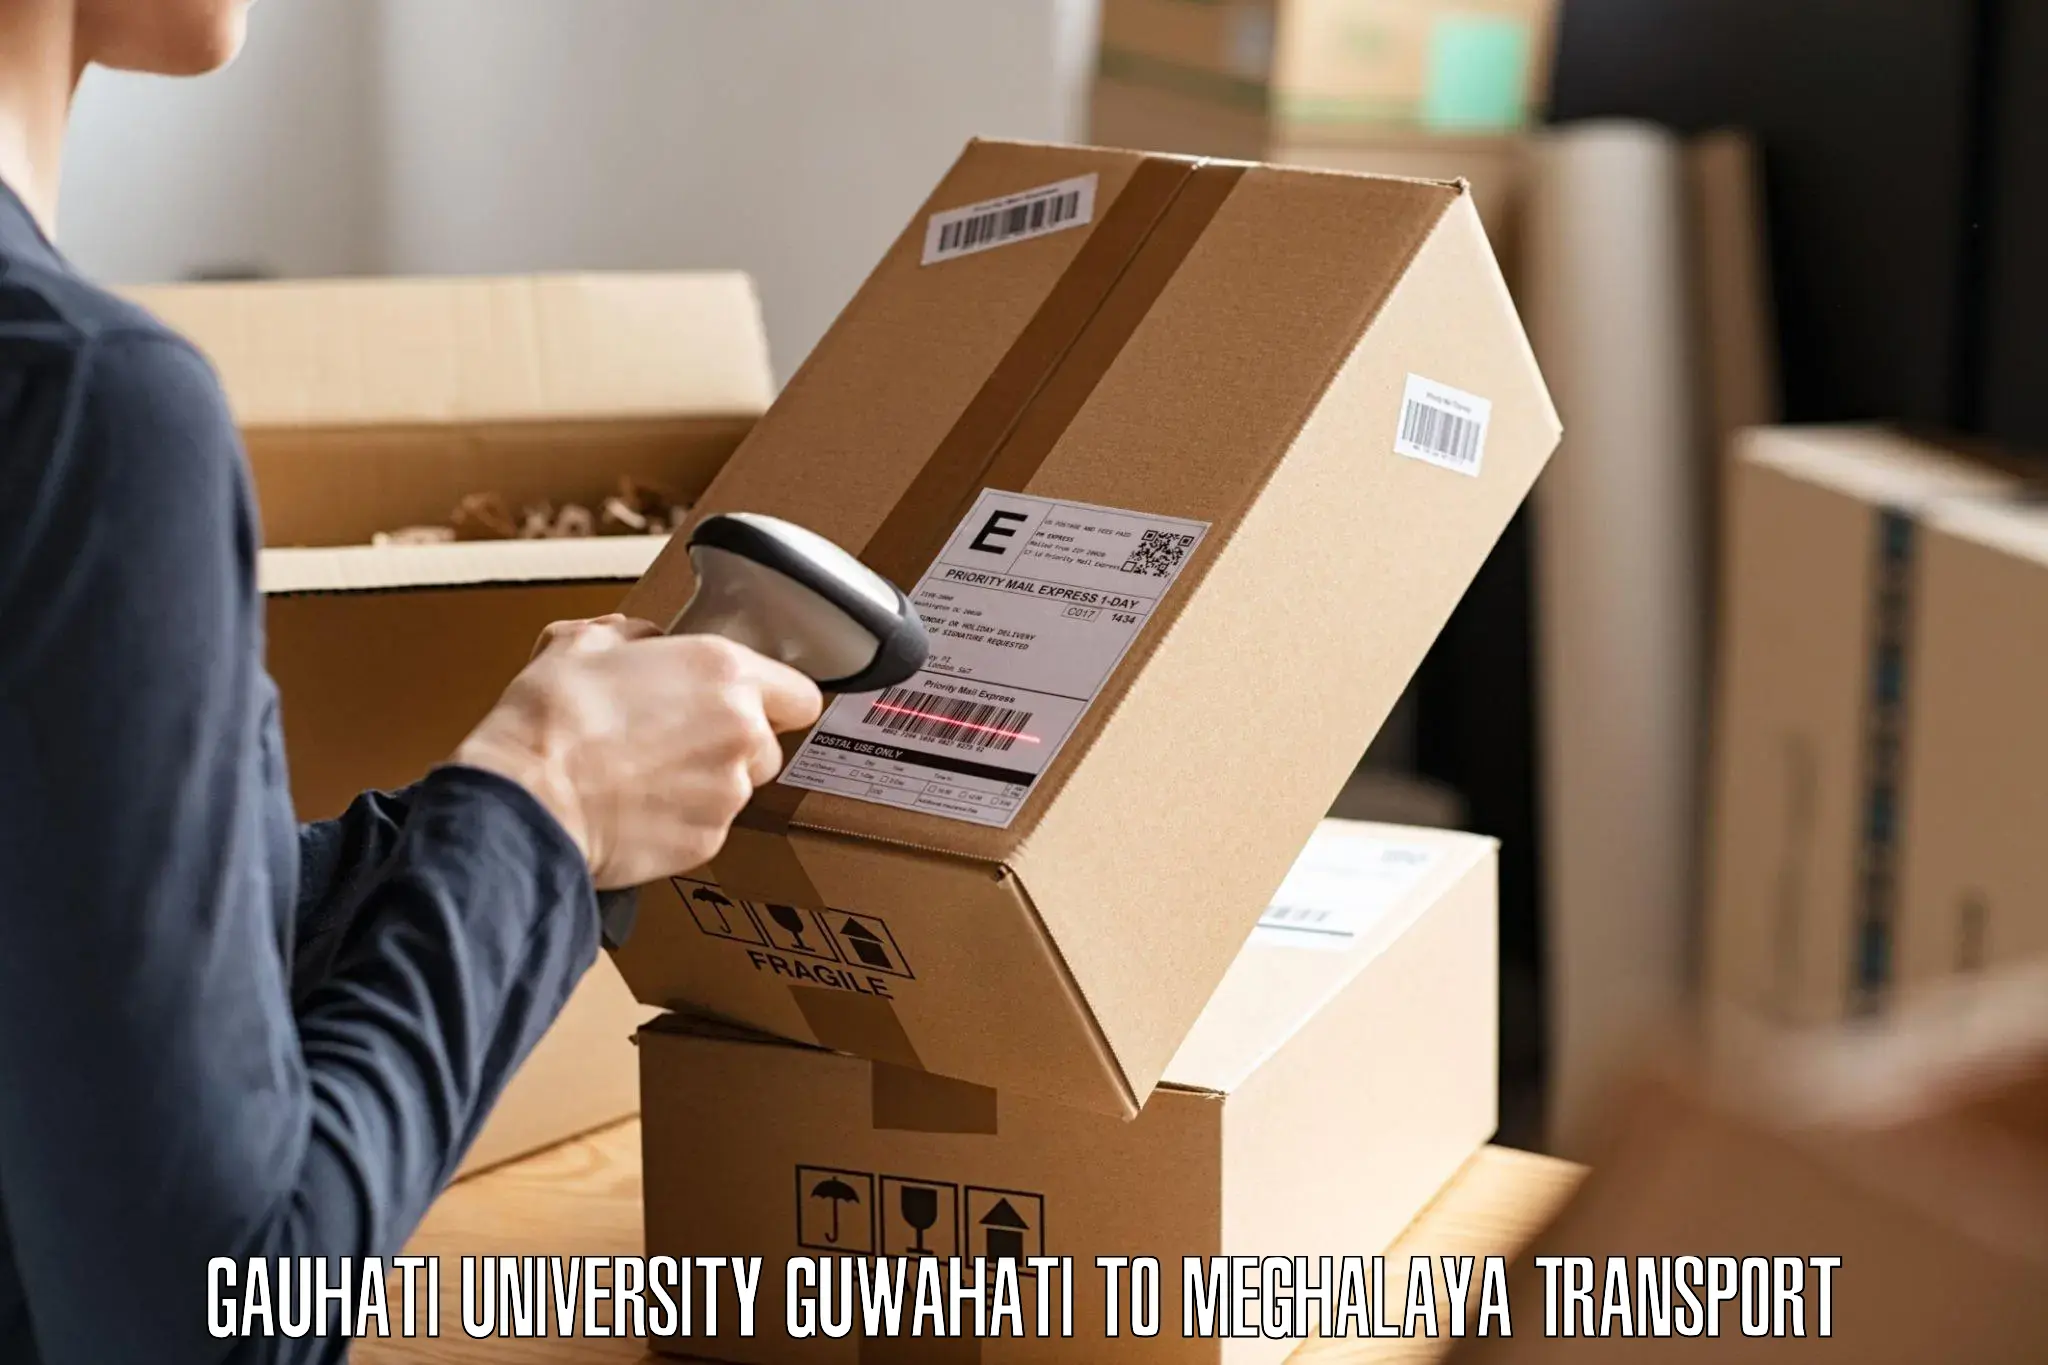 Container transportation services Gauhati University Guwahati to Umsaw